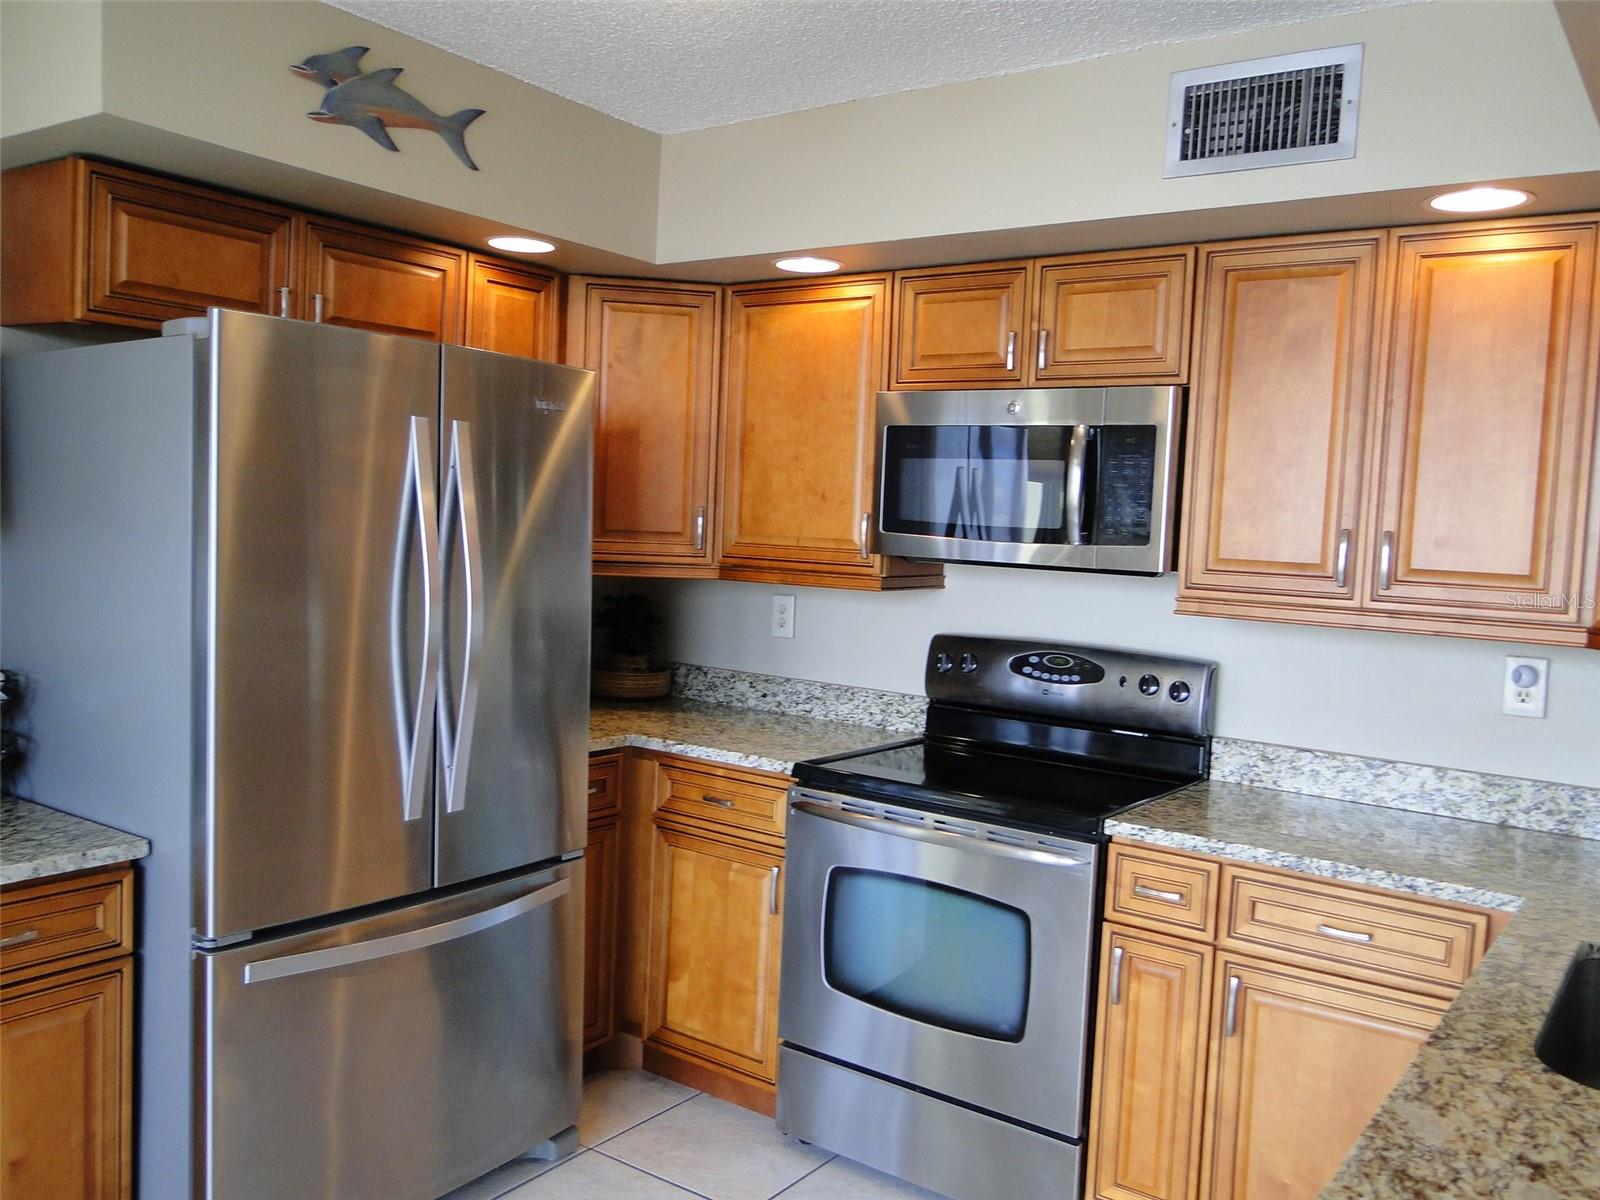 Stainless Steel Appliances.. Maple Glazed Wood Cabinets..